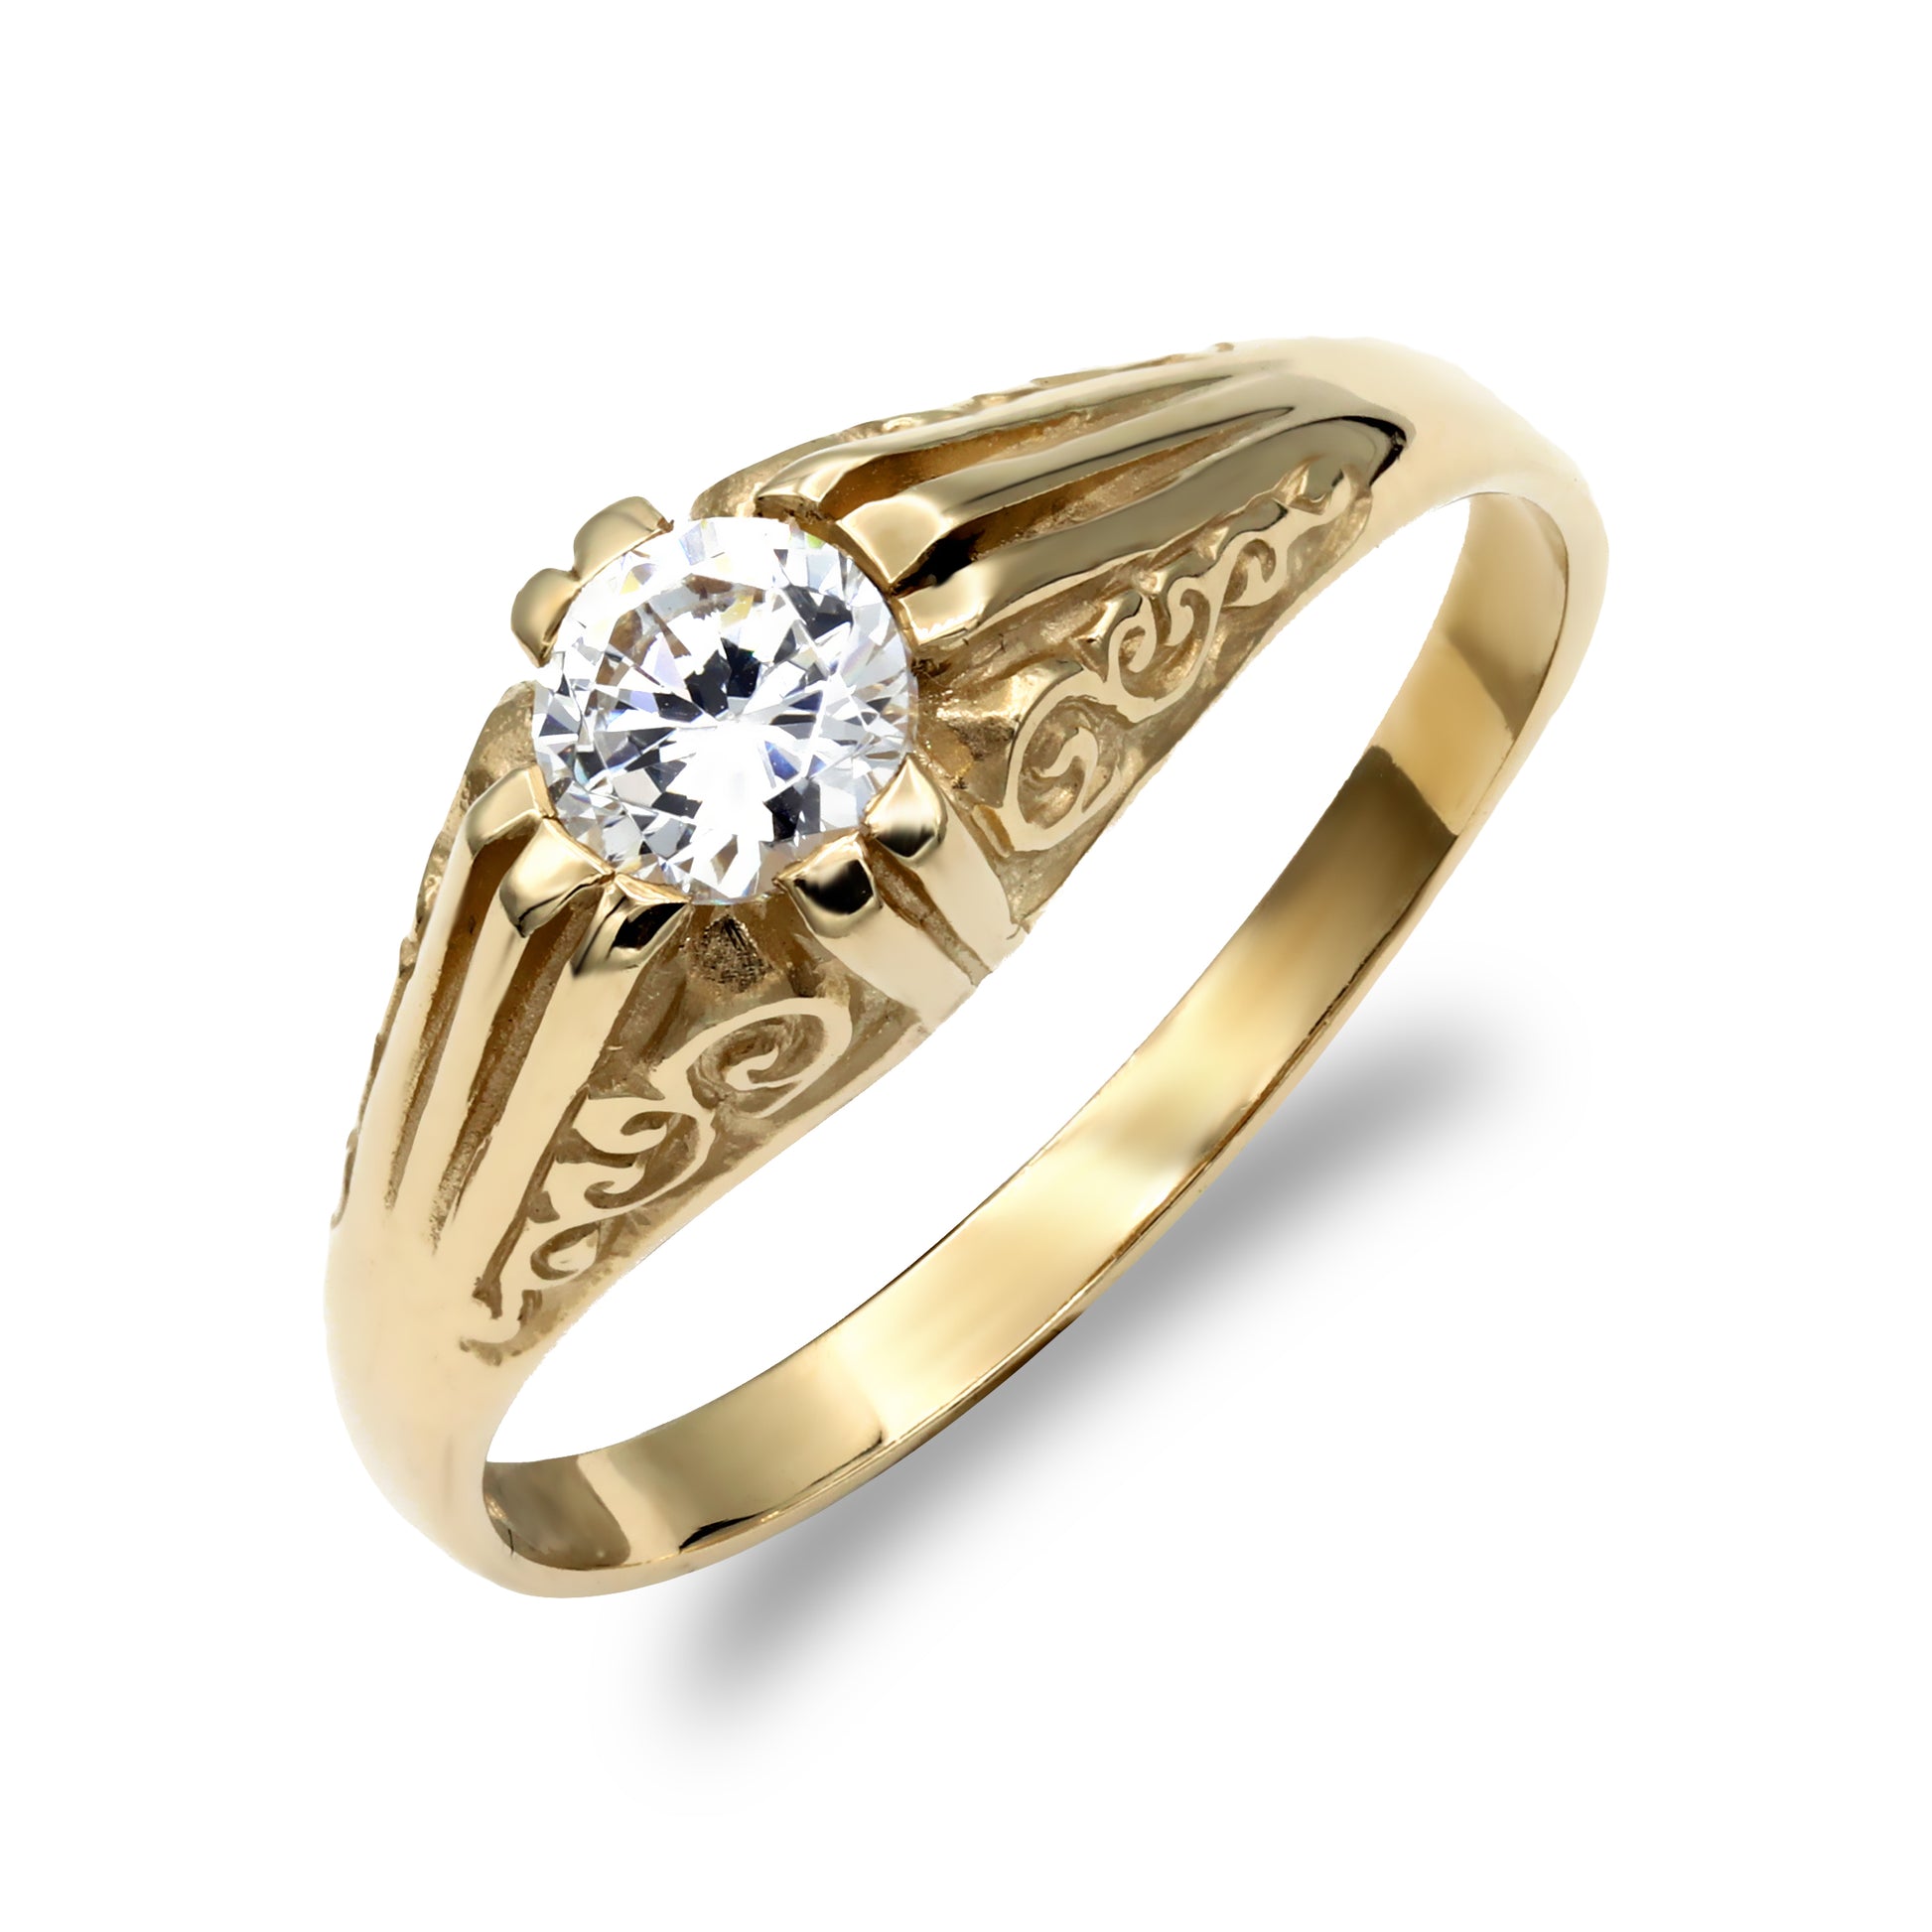 Mens 9ct Gold  CZ Solitaire Carved Gypsy Ring - JRN190